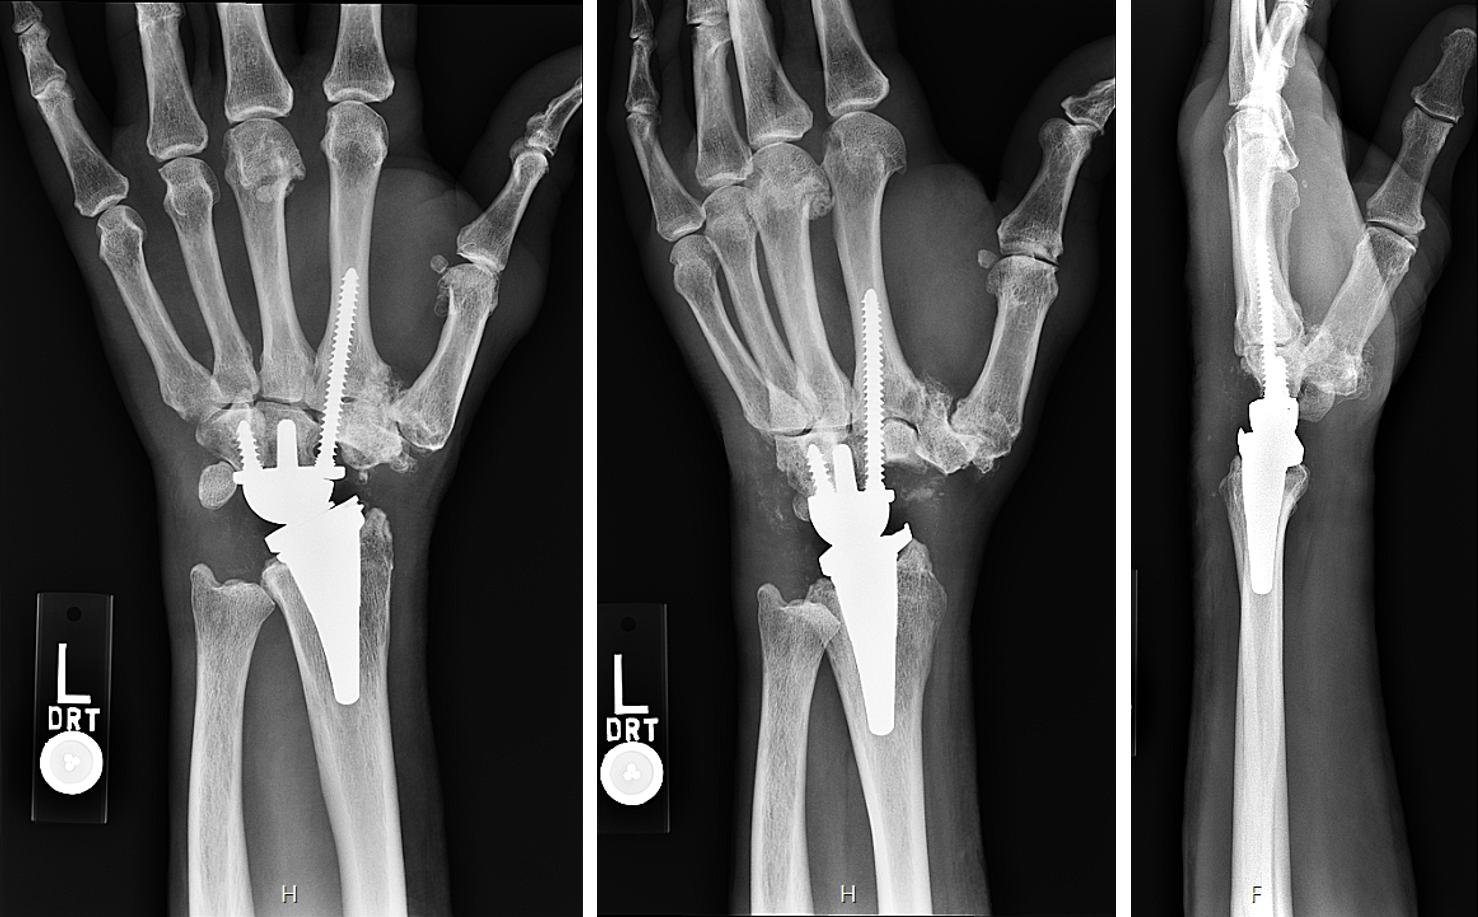 Postoperative X-rays showing the implanted total wrist replacement. Both components match the plan well and appear sized and positioned appropriately.